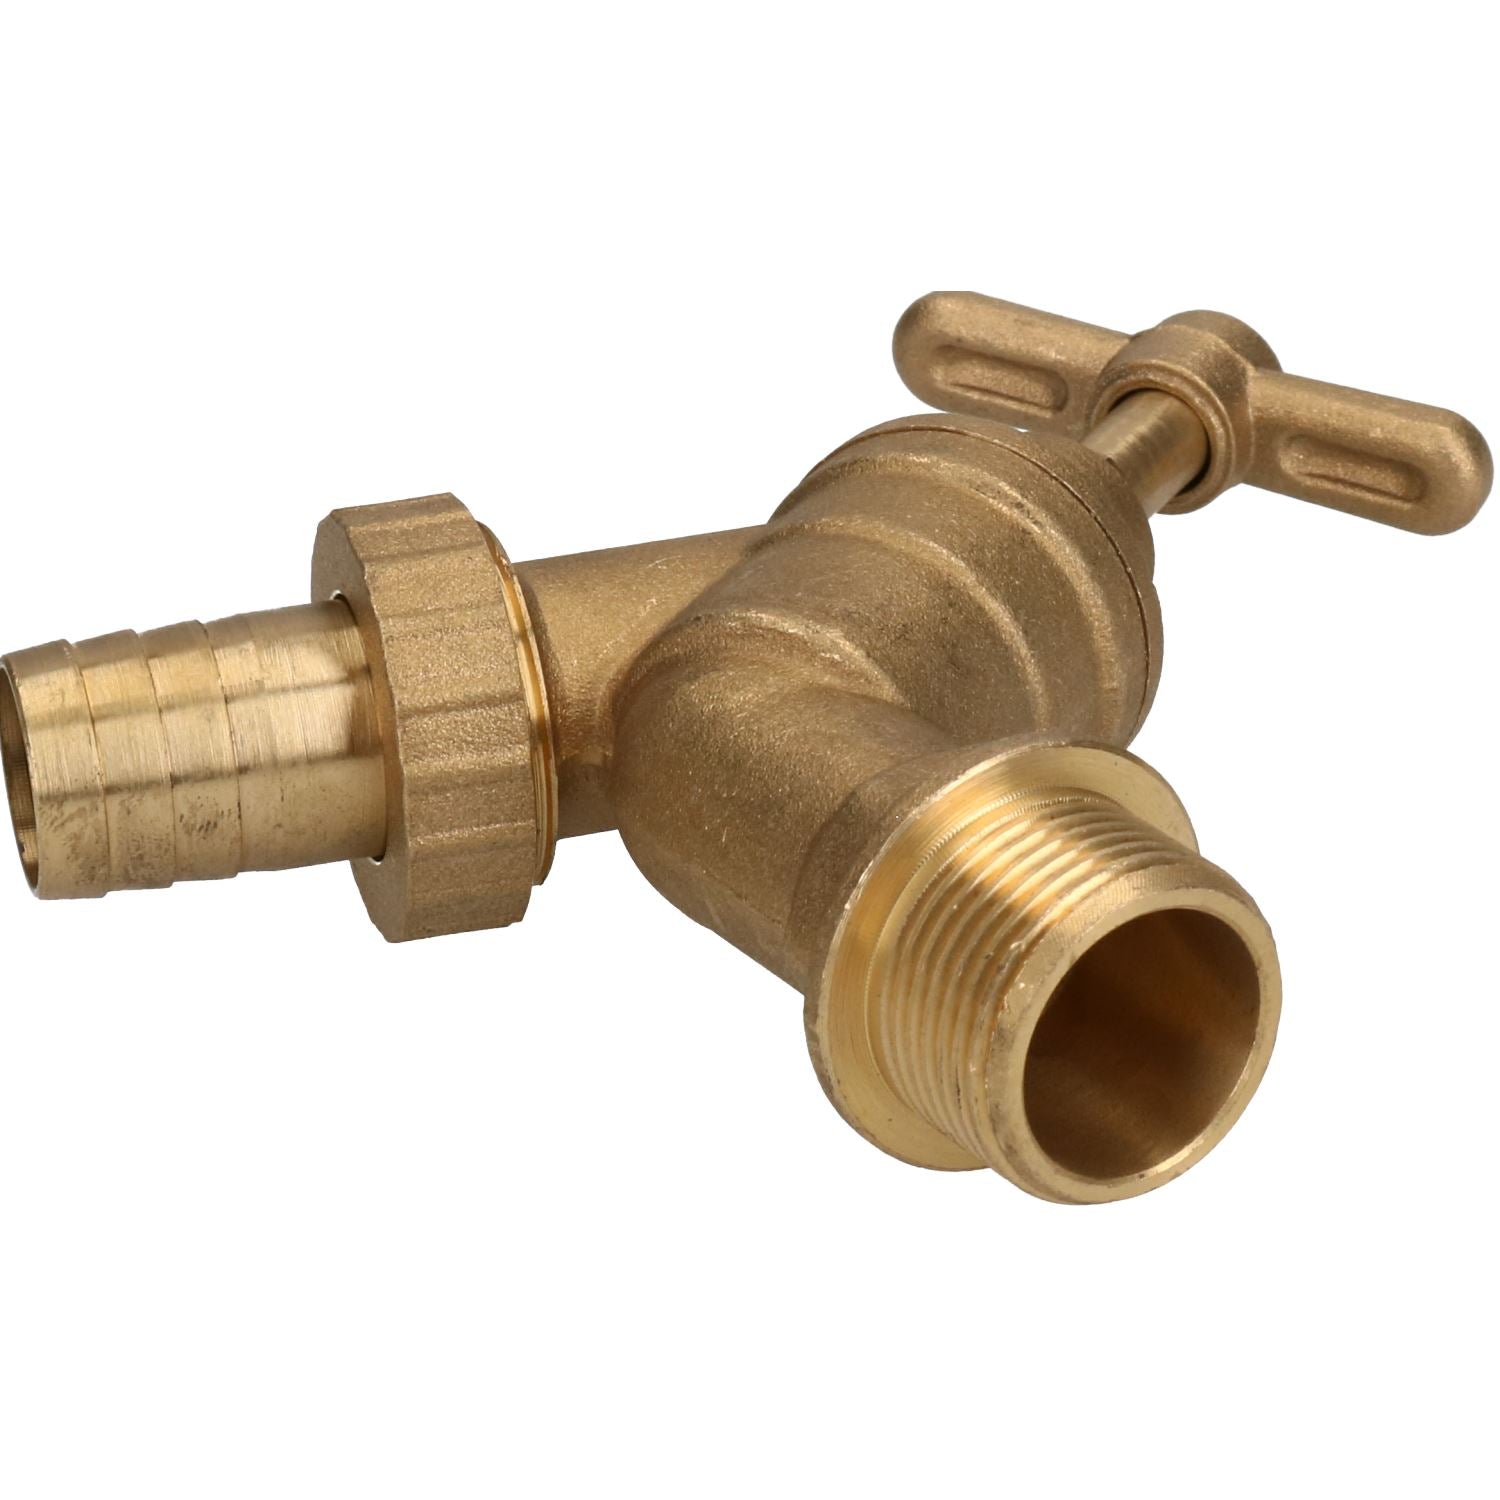 3/4" Hose Union Bib Tap Brass Outdoor Water Supply Weather-Resistant Barb